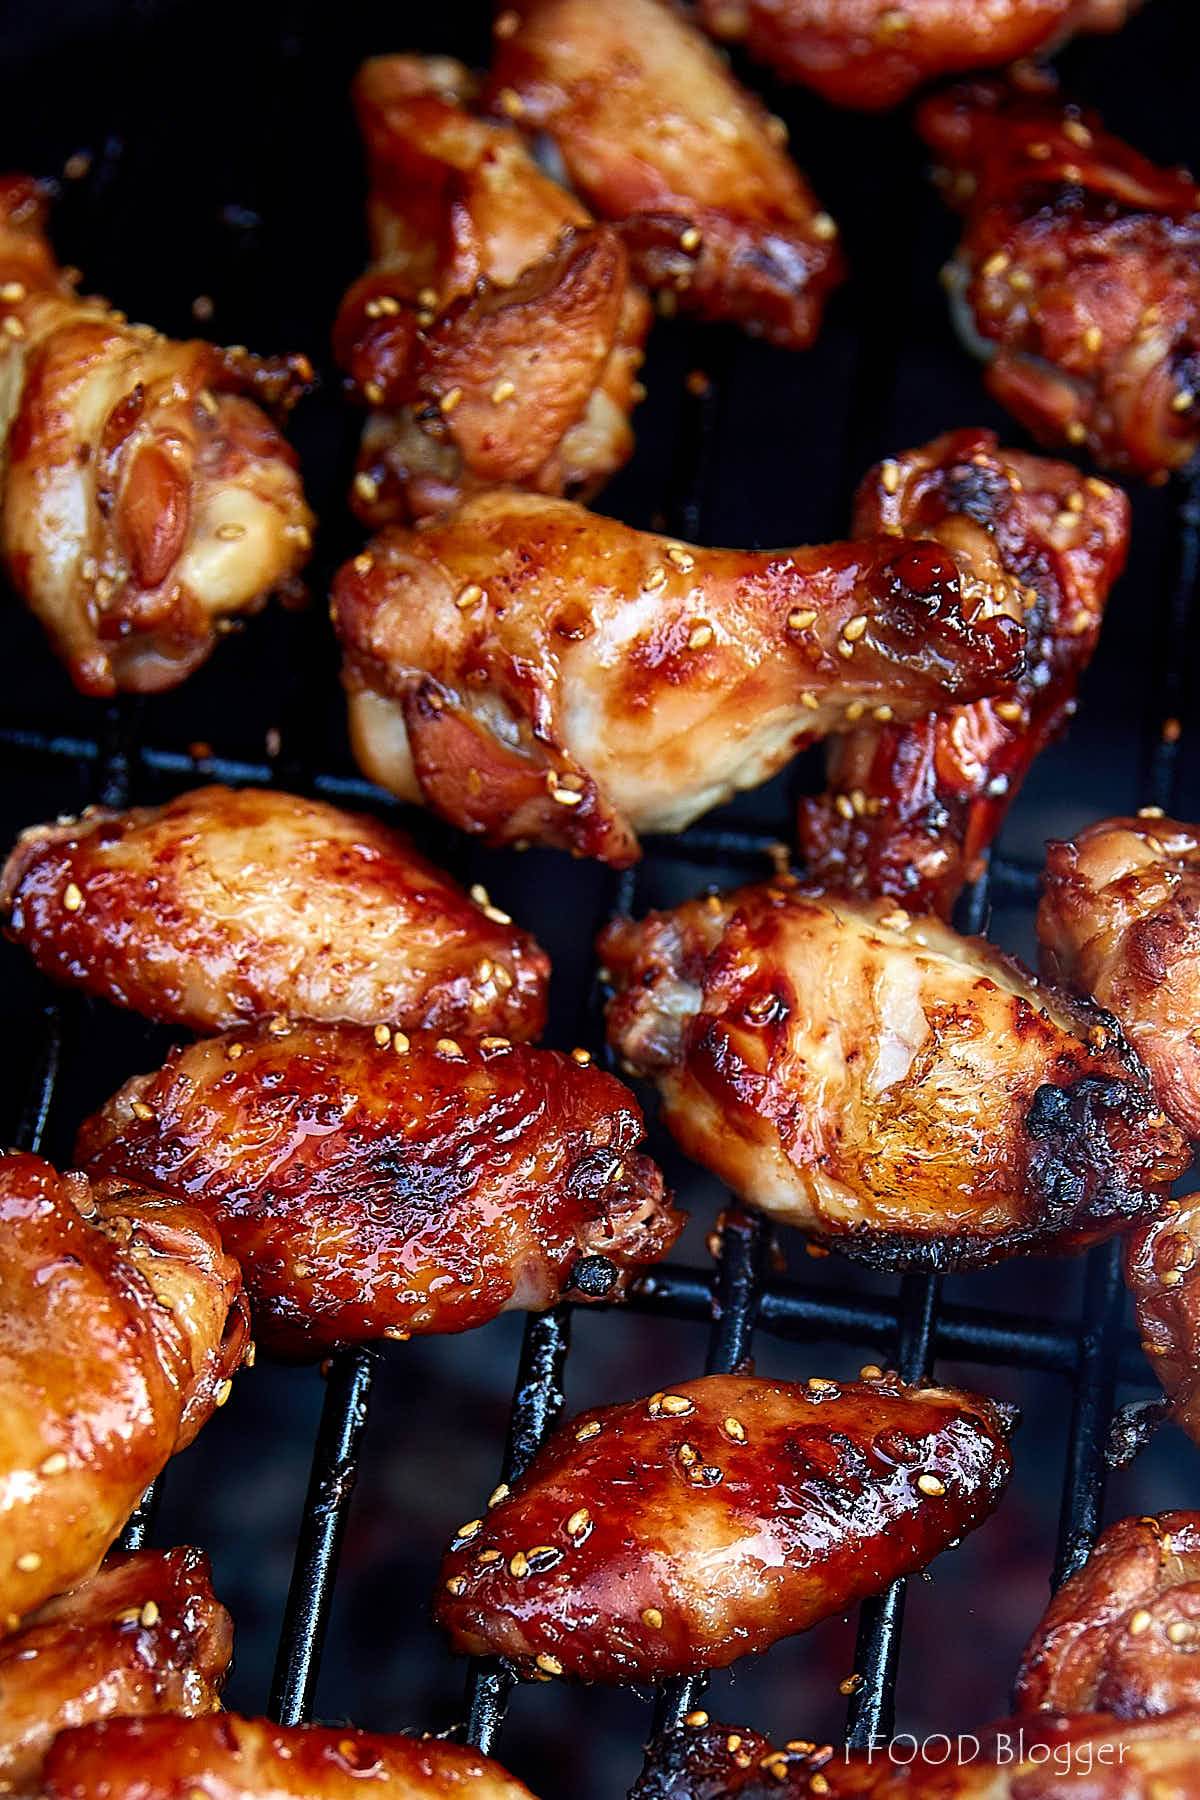 Grilled chicken wings, fully cooked, crispy and browned, on a grill grate over a bed of charcoal.